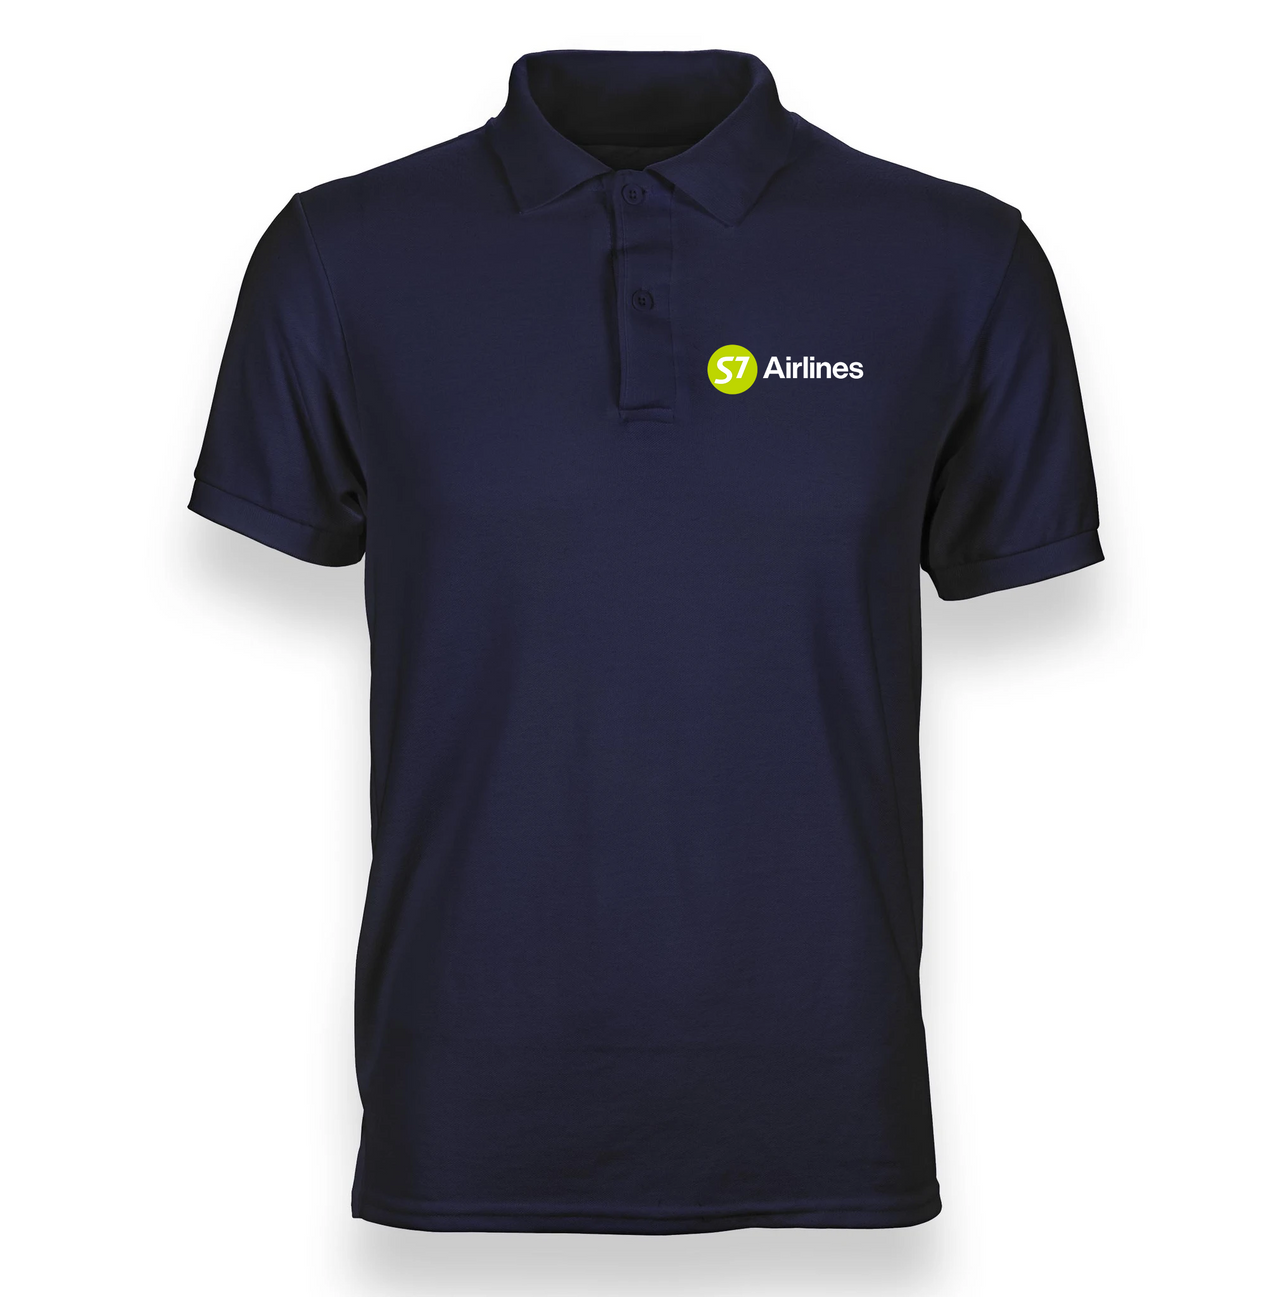 S7 AIRLINES POLO T-SHIRT